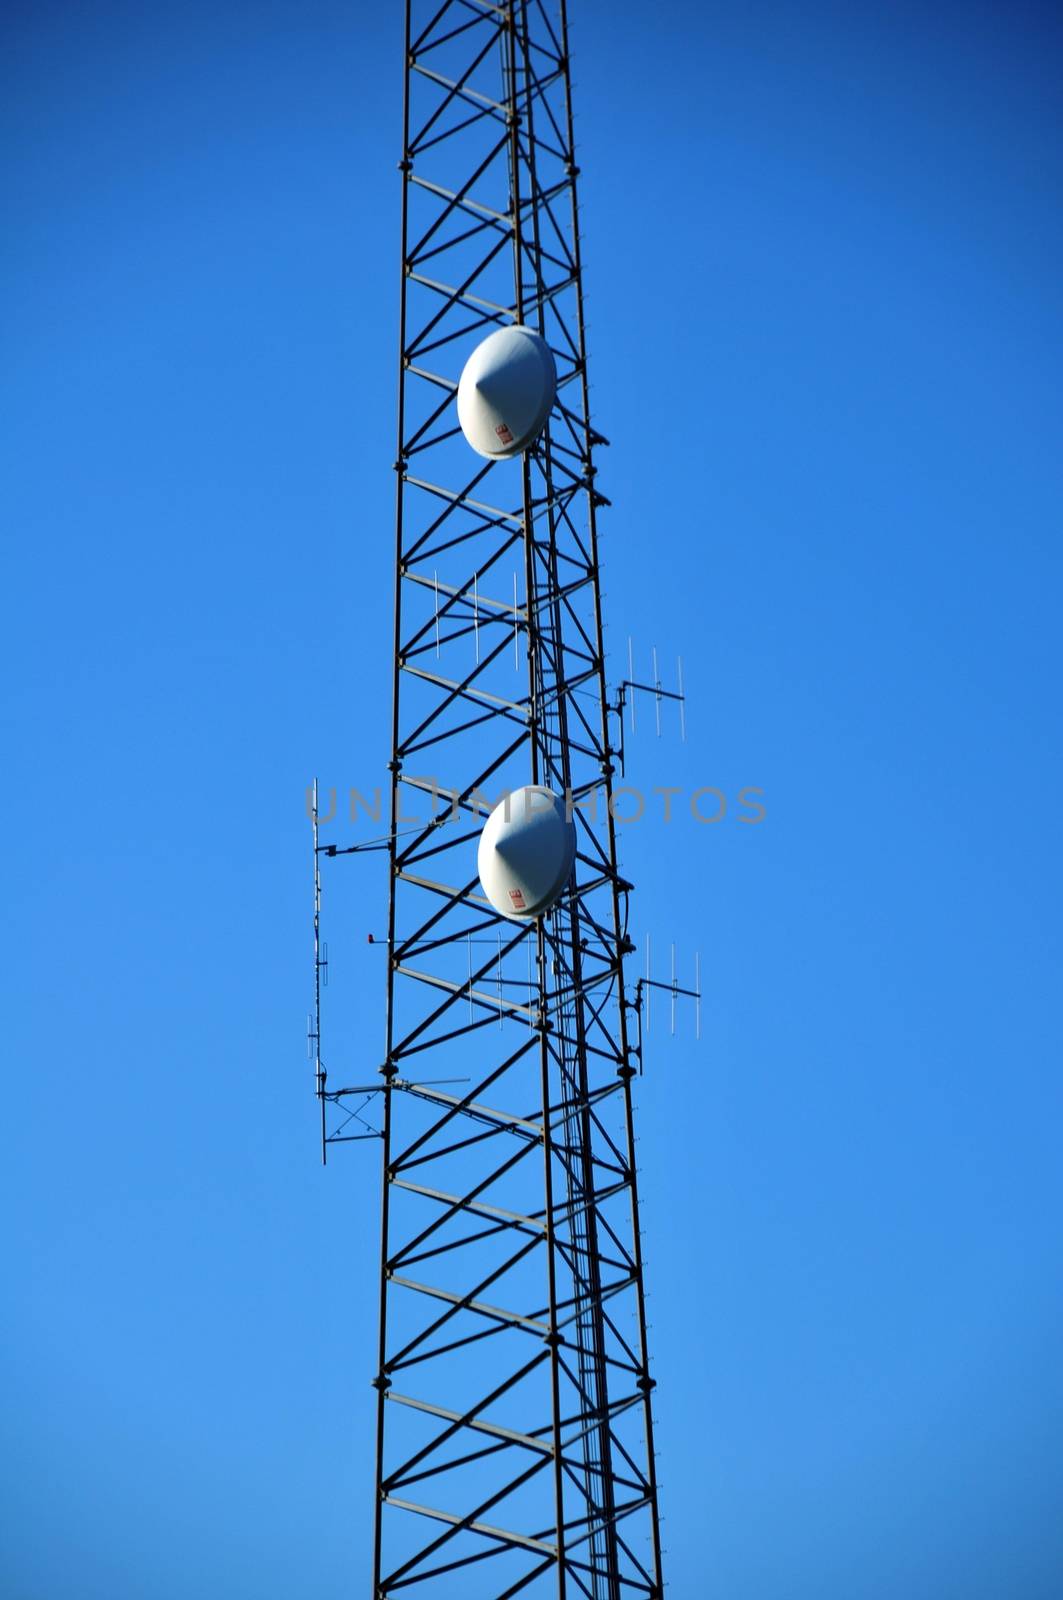 GSM Tower by welcomia